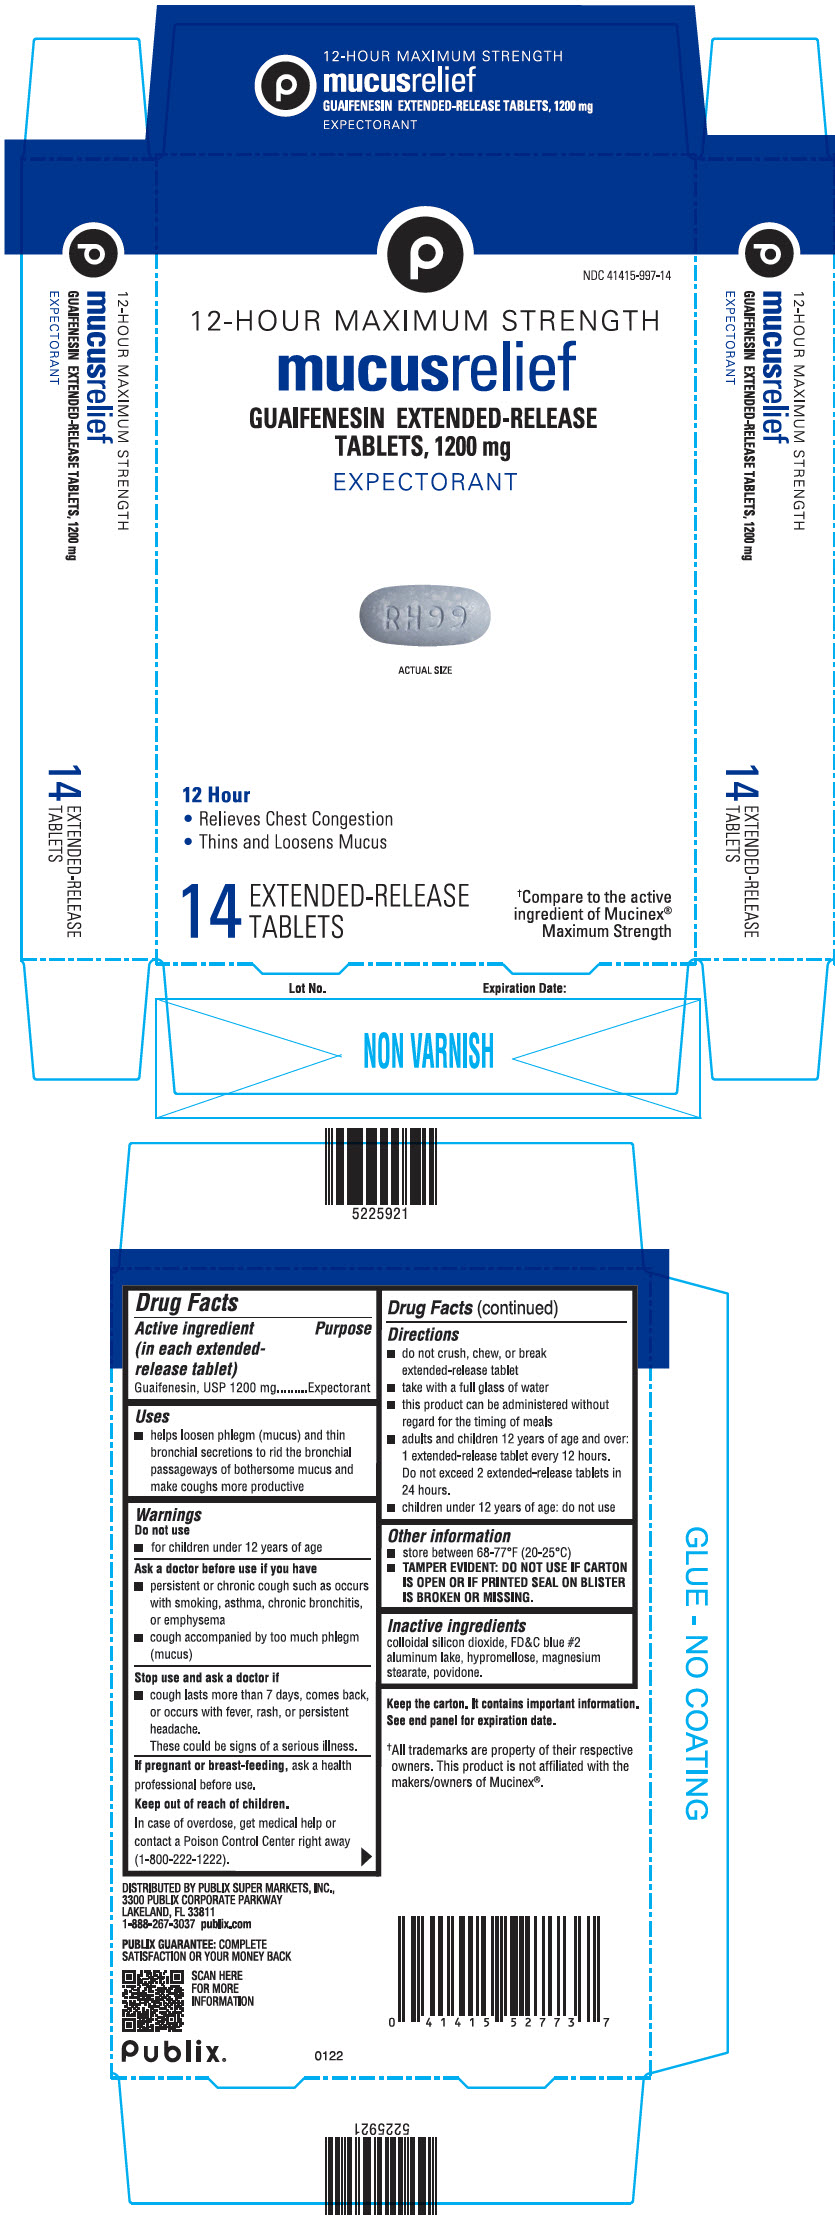 PRINCIPAL DISPLAY PANEL - 1200 mg Extended-Release Tablet Blister Pack Carton